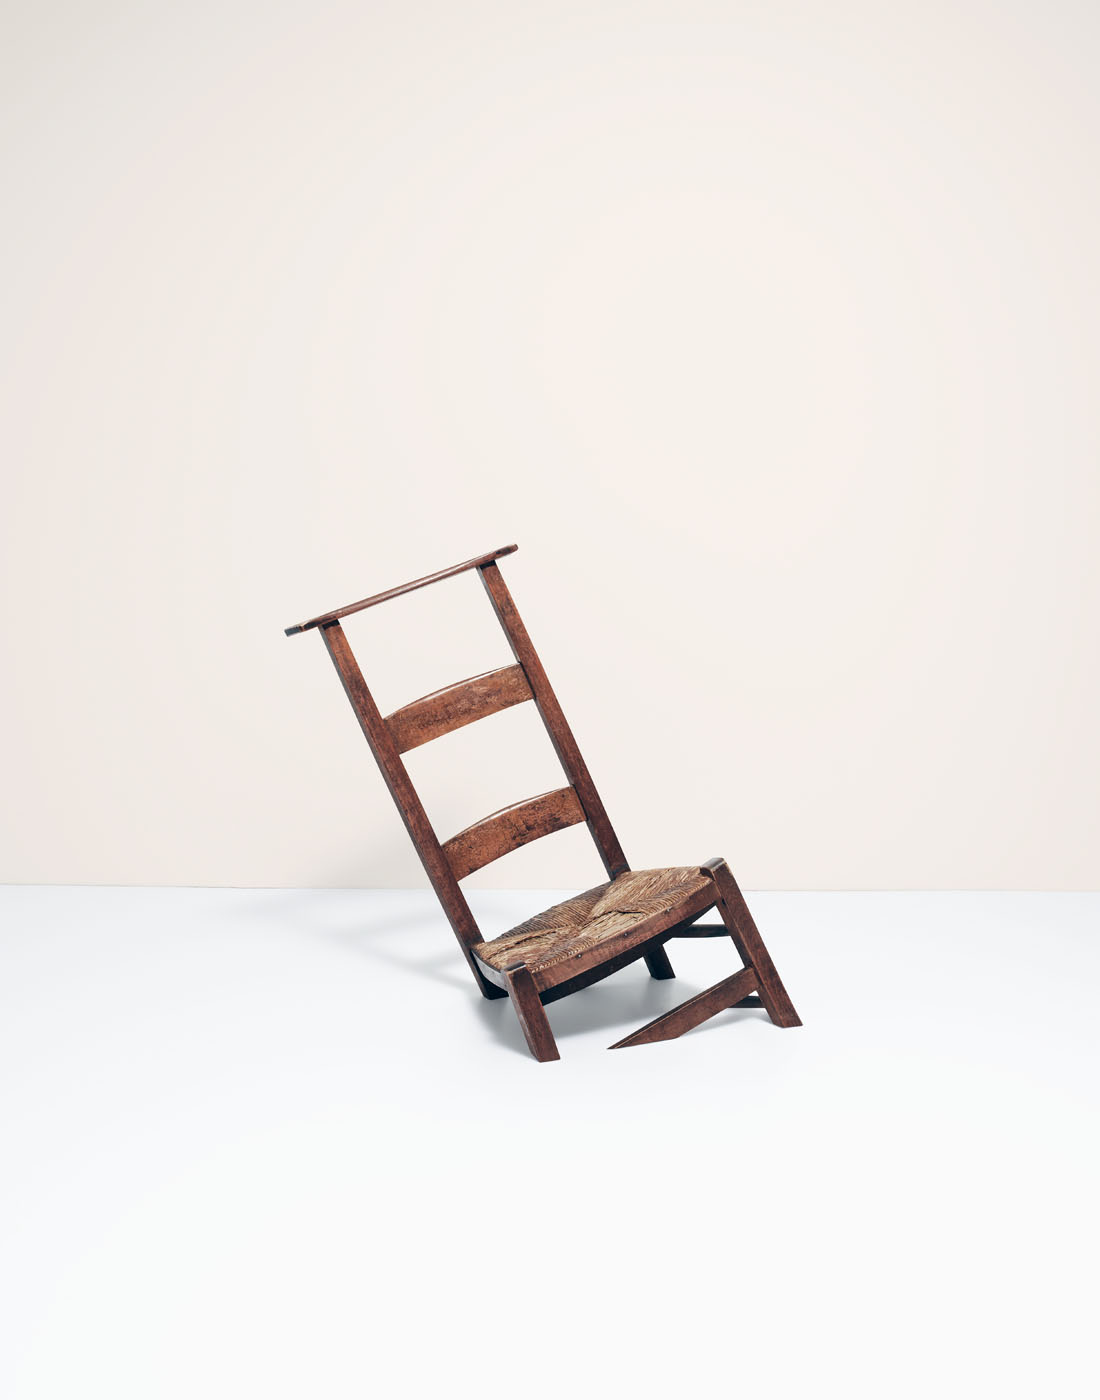 Sinking chair by Alexander Kent London based still life and product photographer.